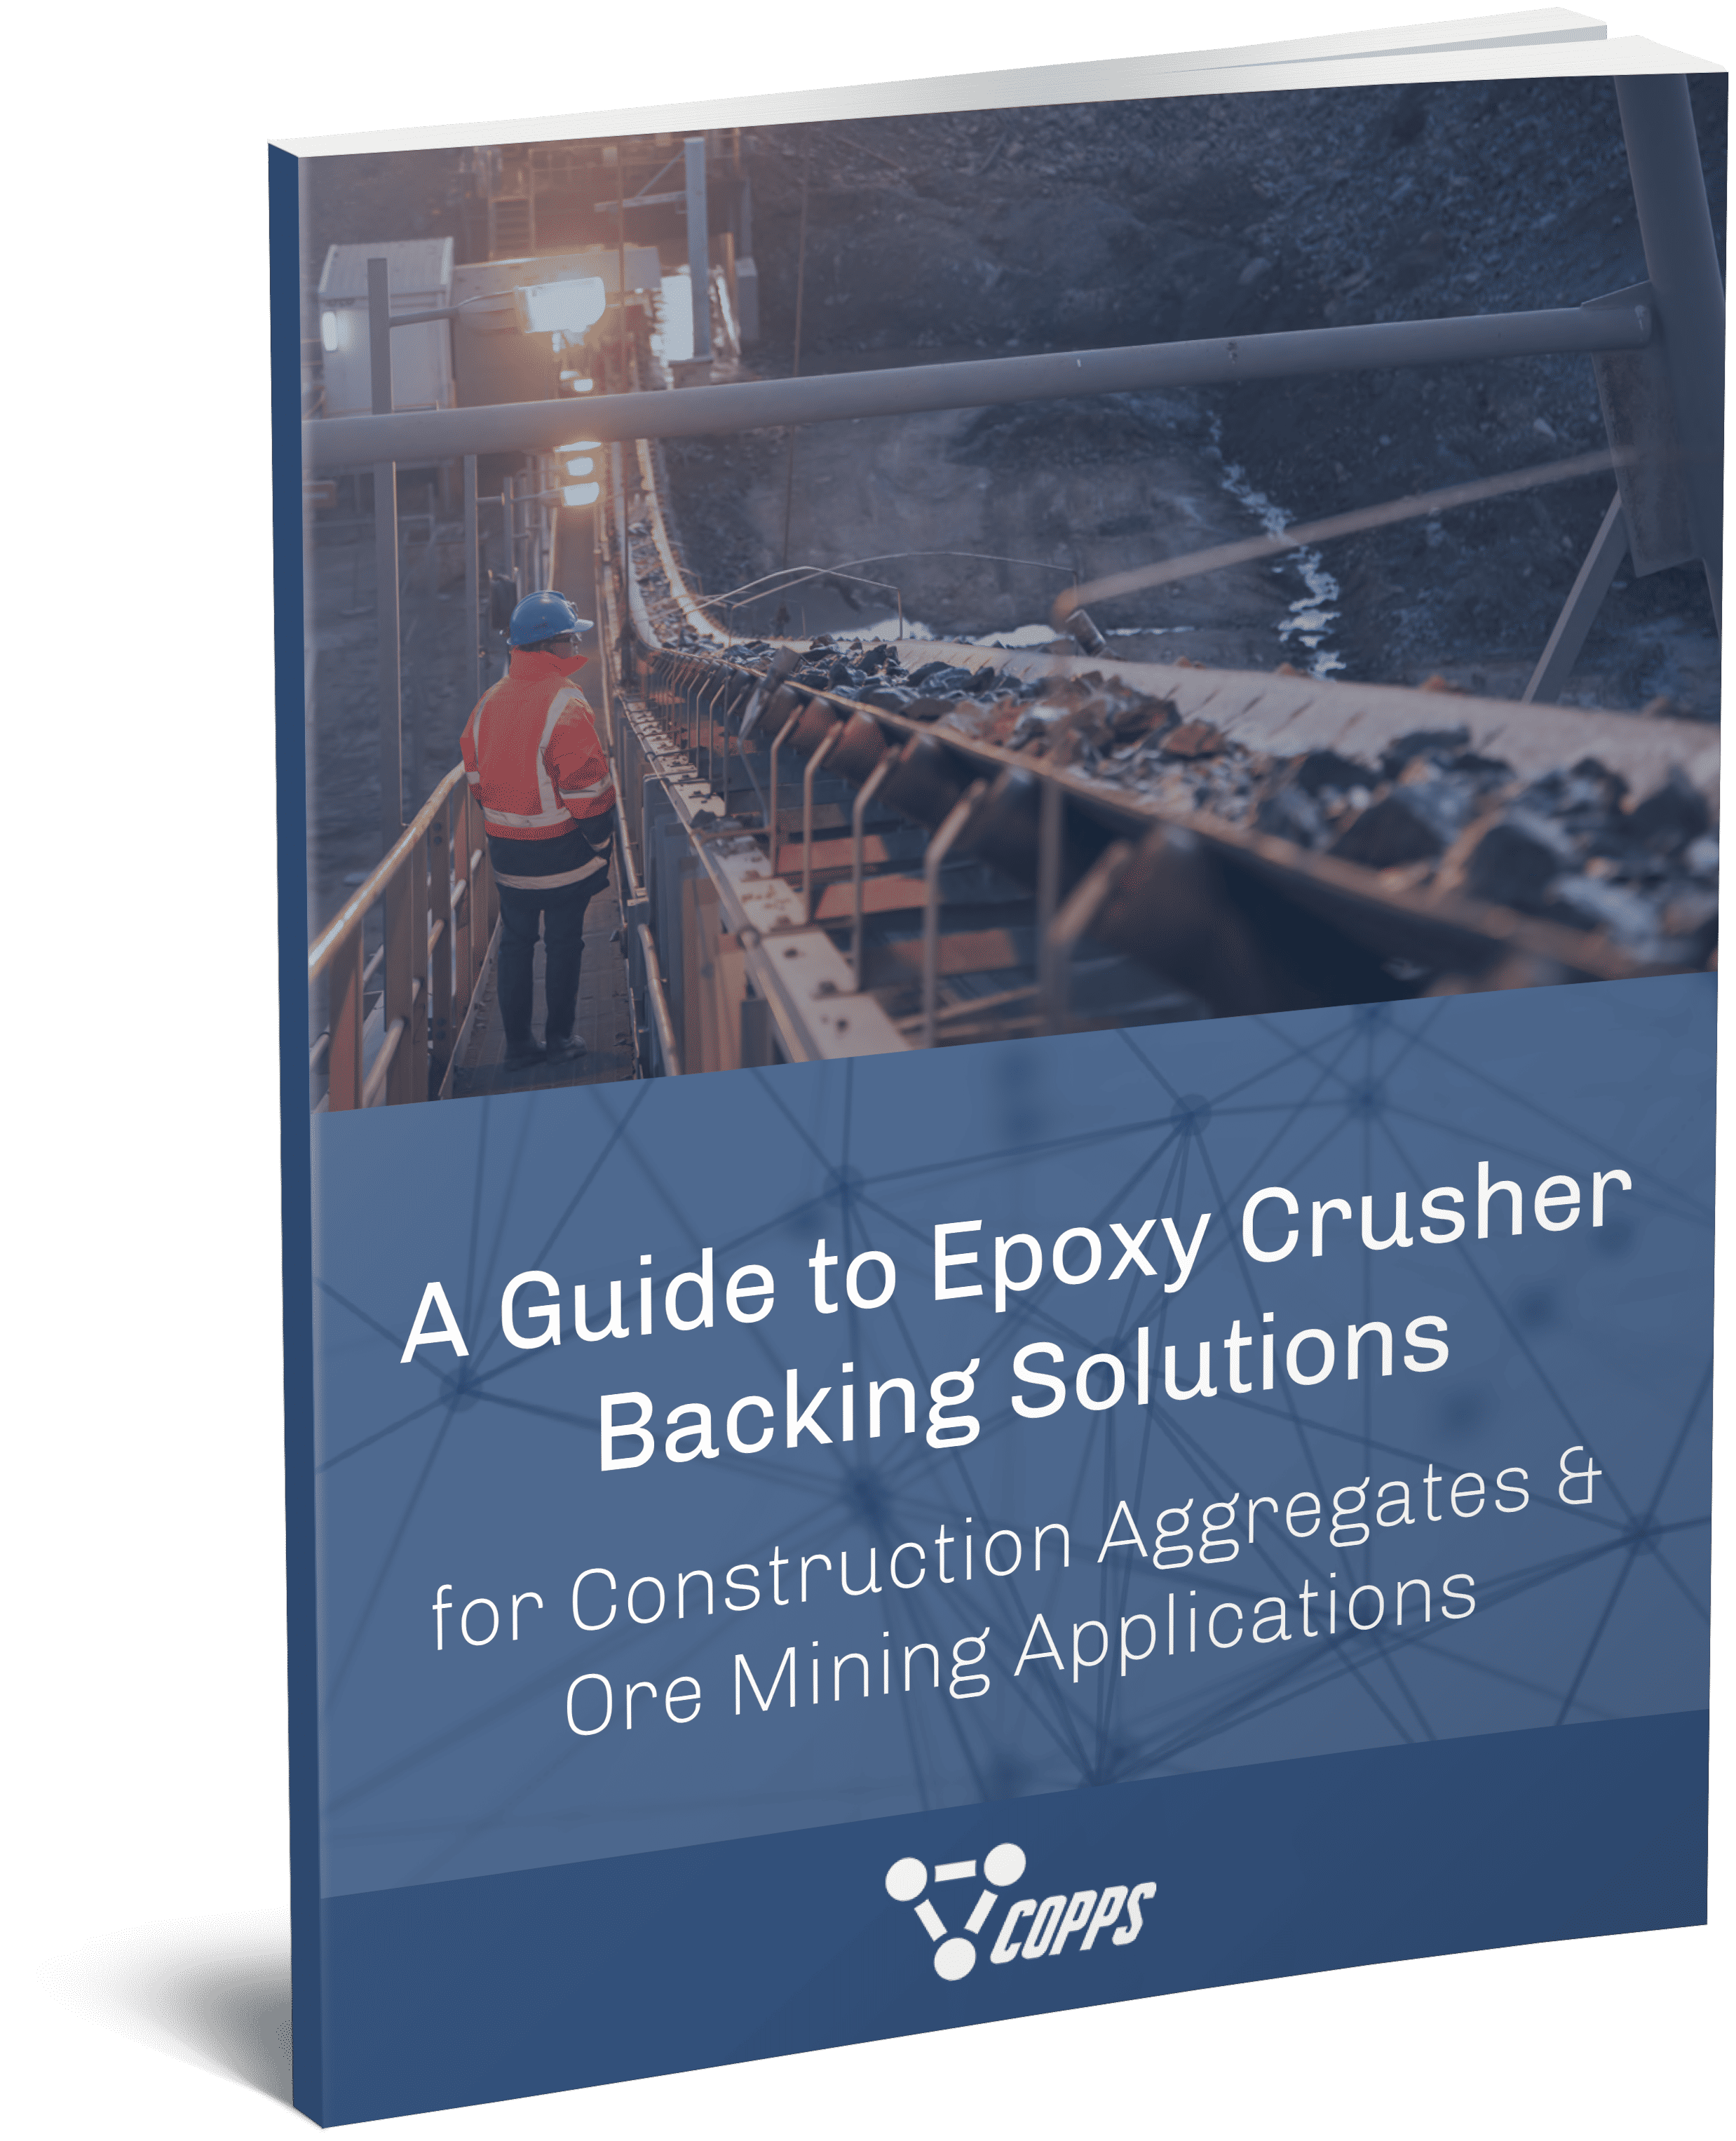 A Guide to Epoxy Crusher Backing Solutions